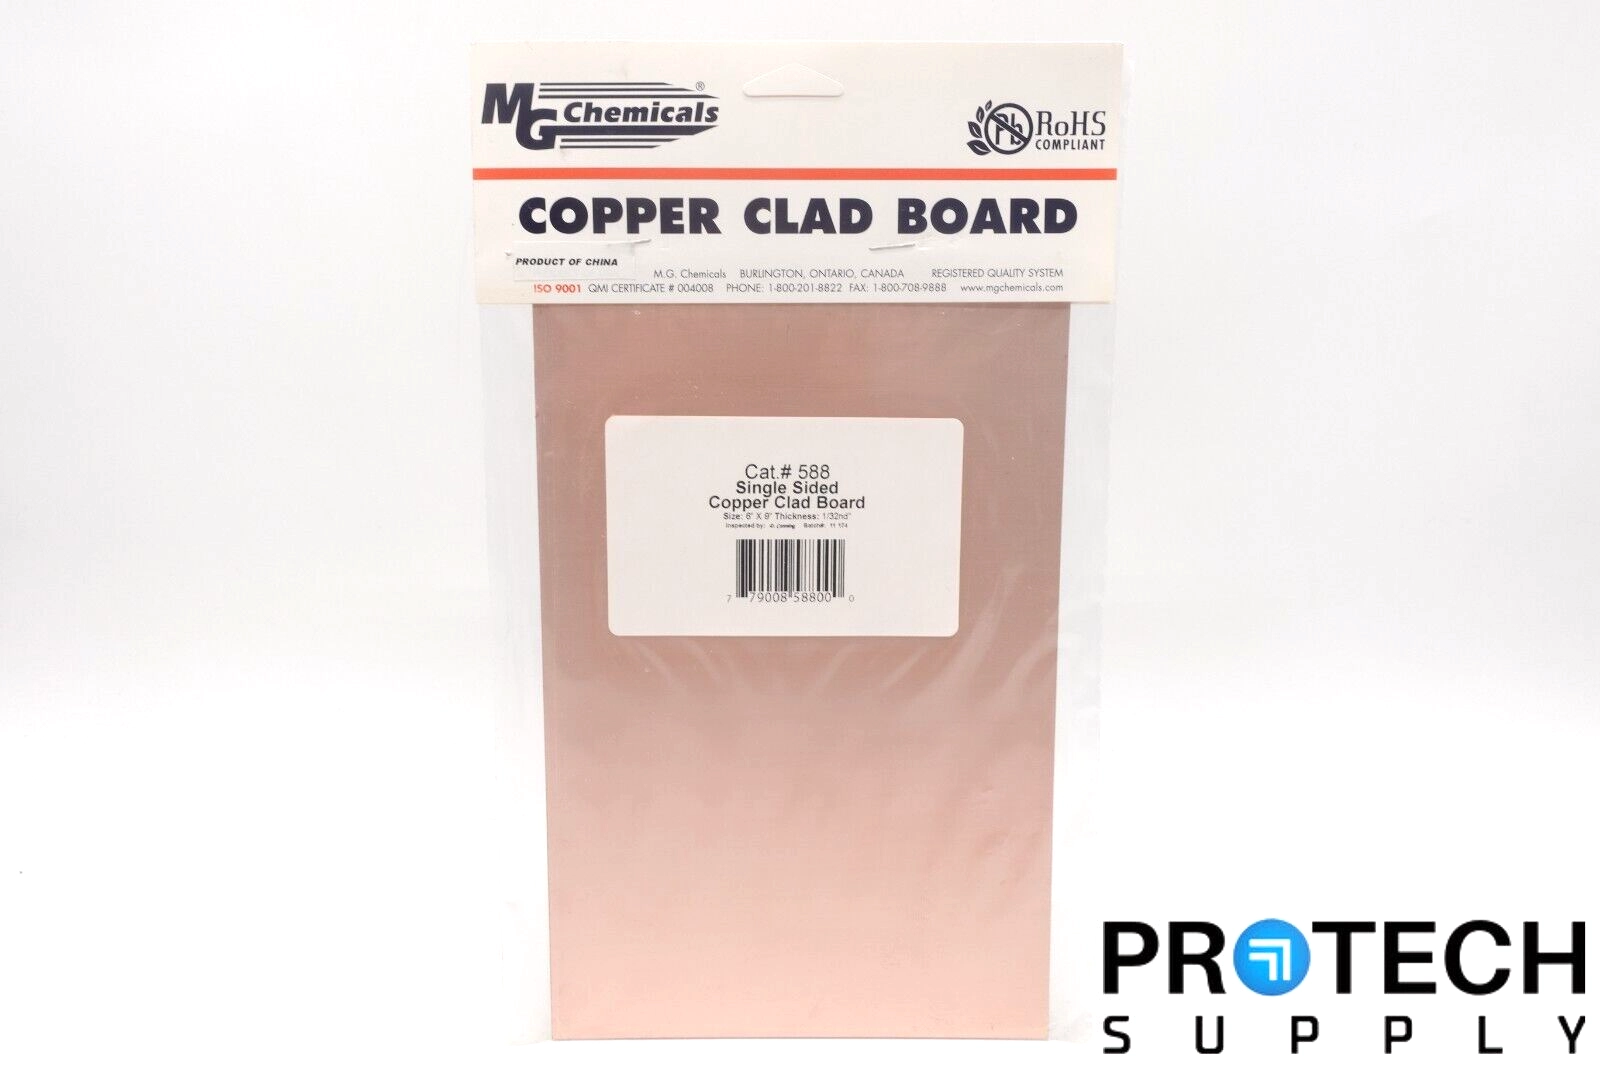 MG Chemicals 588 1-Sided 6" x 9" Copper Clad Board